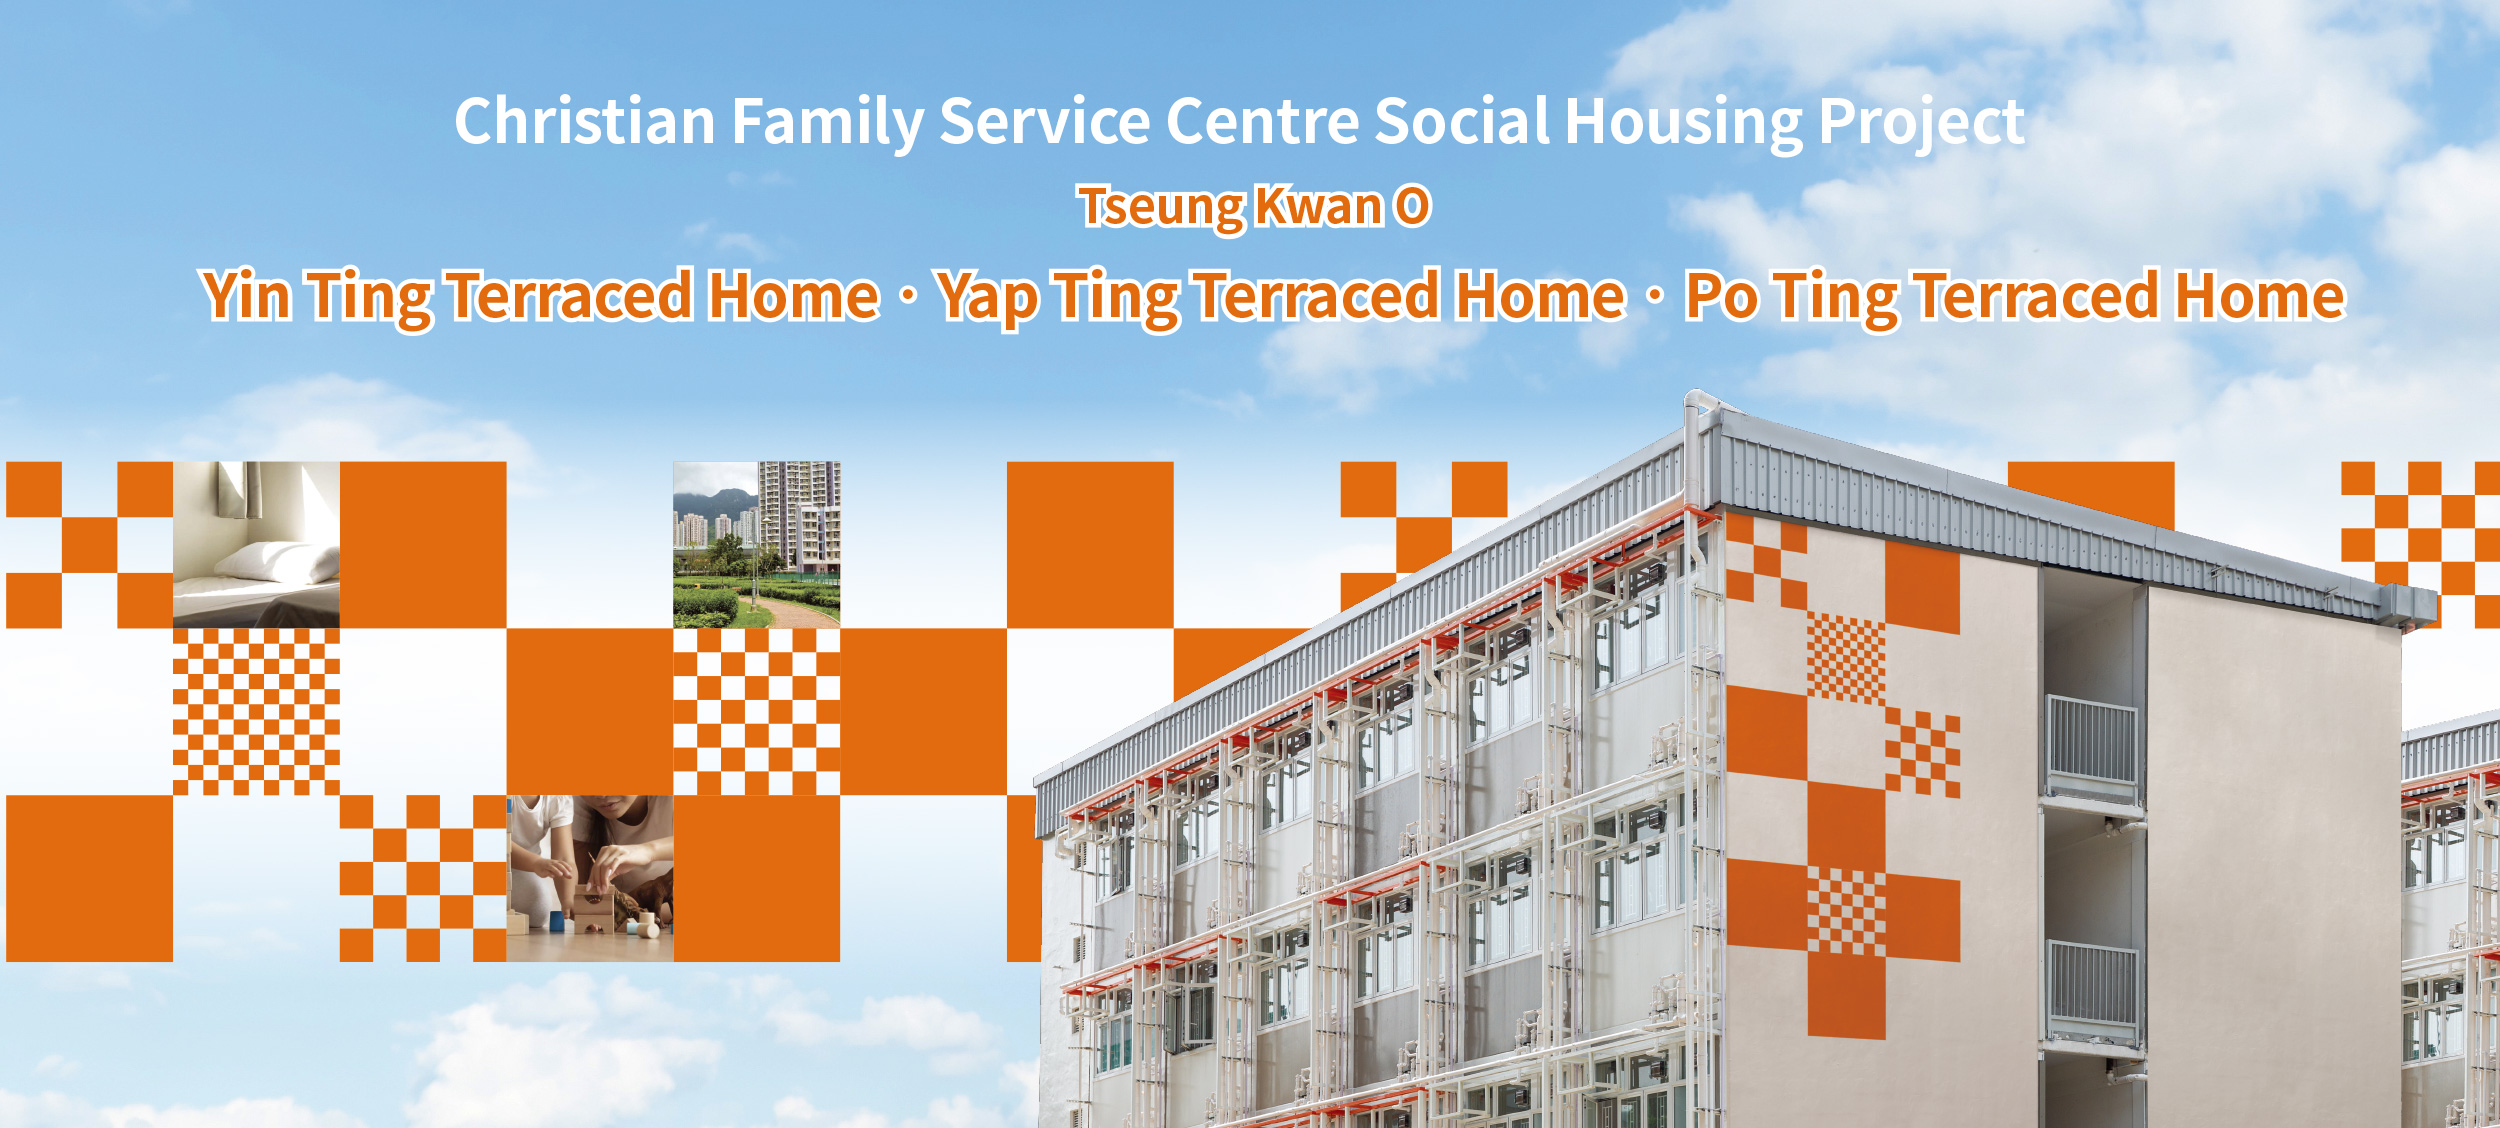 Christian Family Service Centre Social Housing Project 